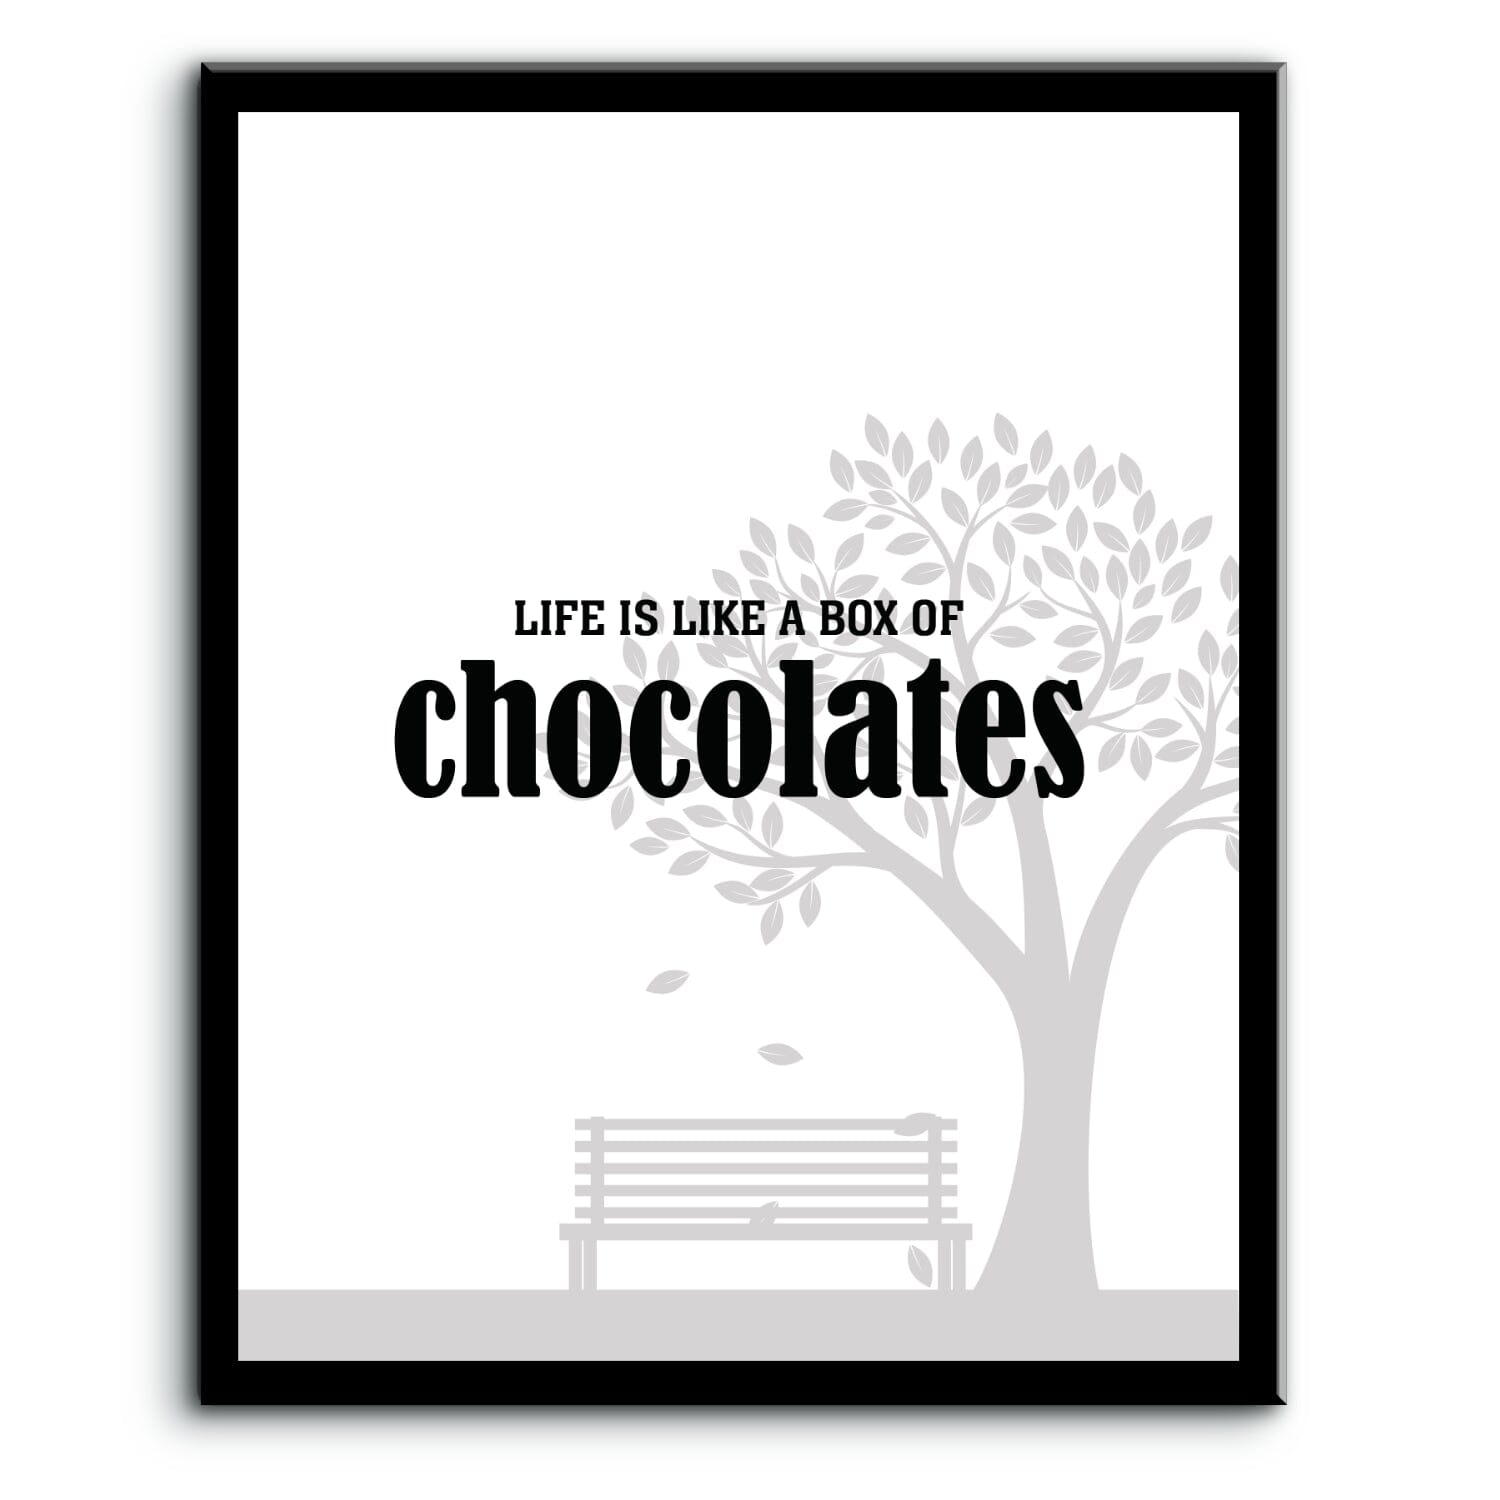 Life is Like a Box of Chocolates - Wise and Witty Quote Art Wise and Wiseass Quotes Song Lyrics Art 8x10 Plaque Mount 